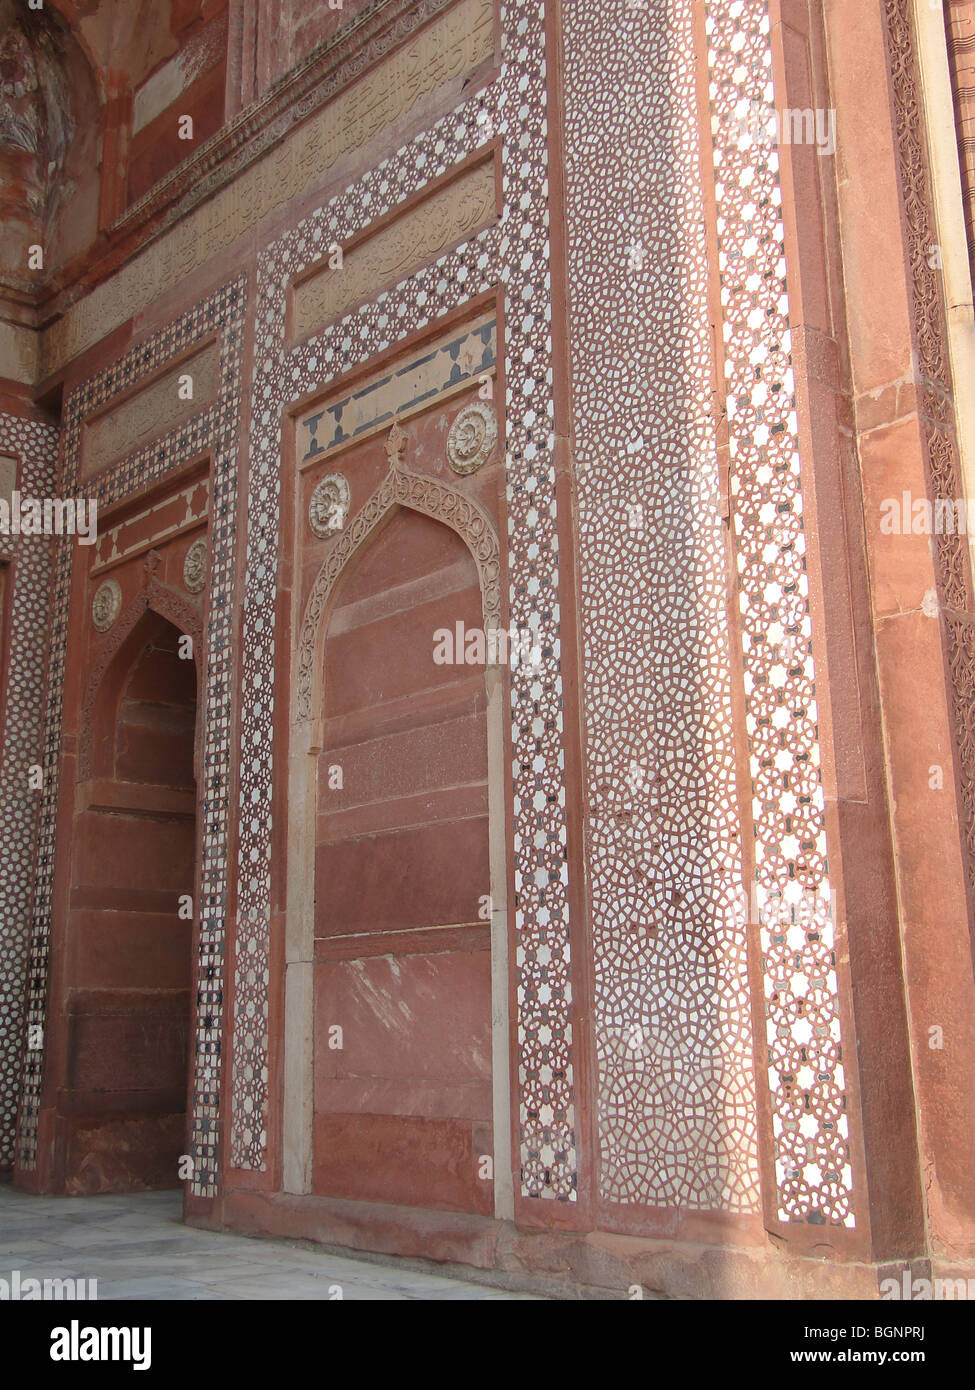 Mosque interior with intricate geometric designs, Fatepur Sikri, India Stock Photo